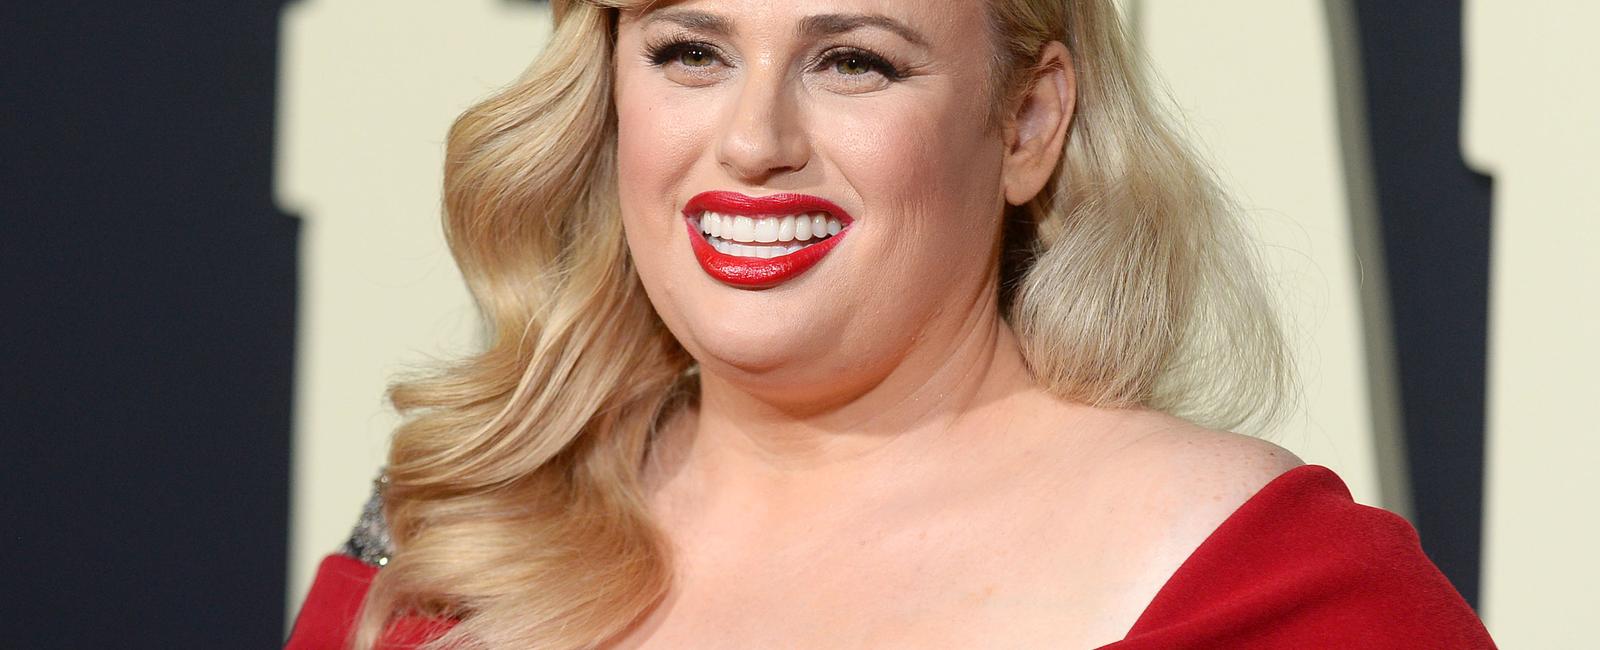 Rebel wilson became an actor after contracting malaria and hallucinating that she d won an oscar